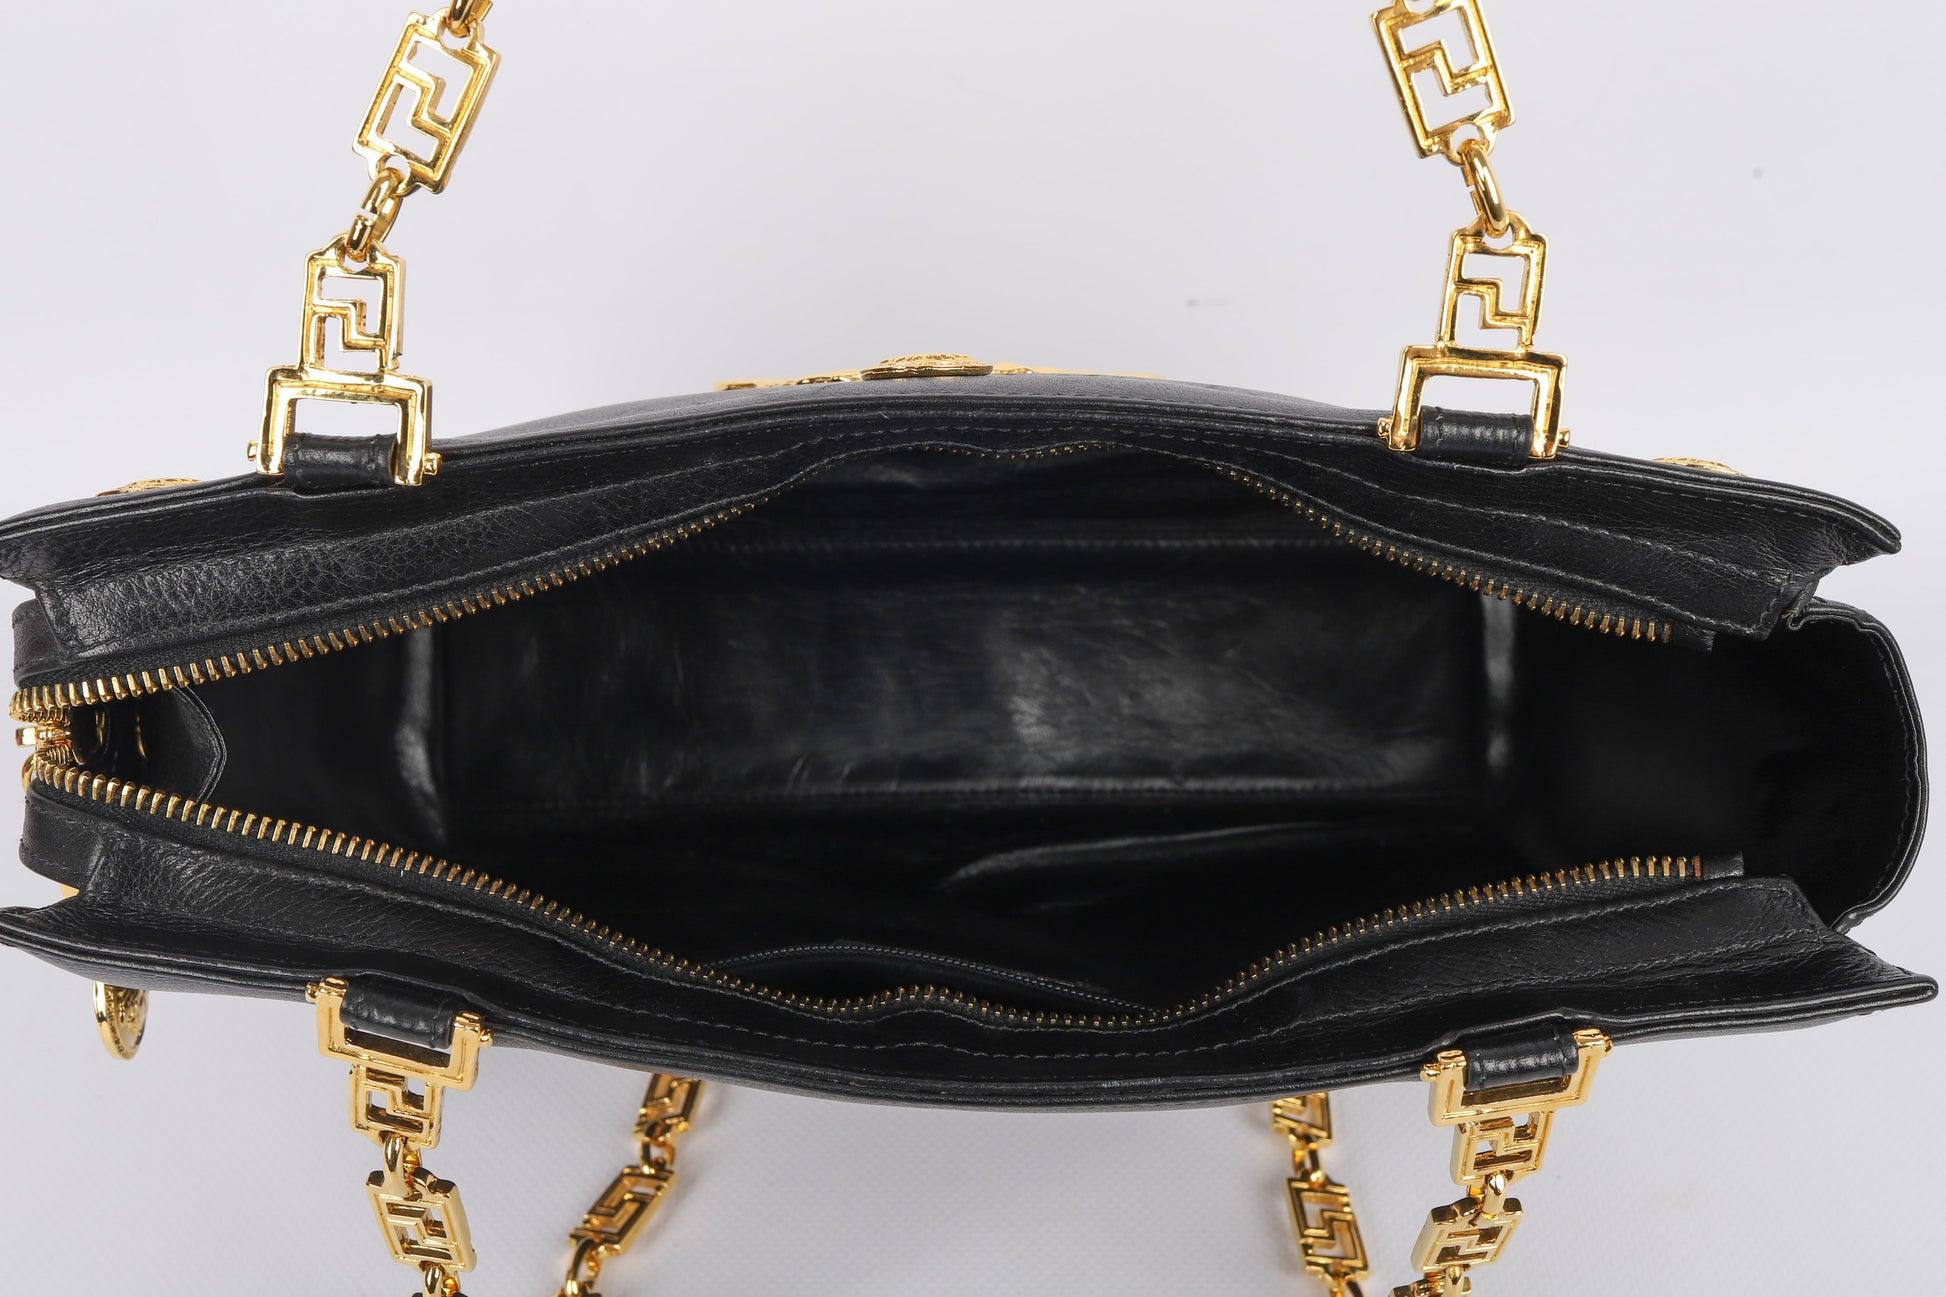 Gianni Versace Black Leather Bag with Golden Metal Elements For Sale 3